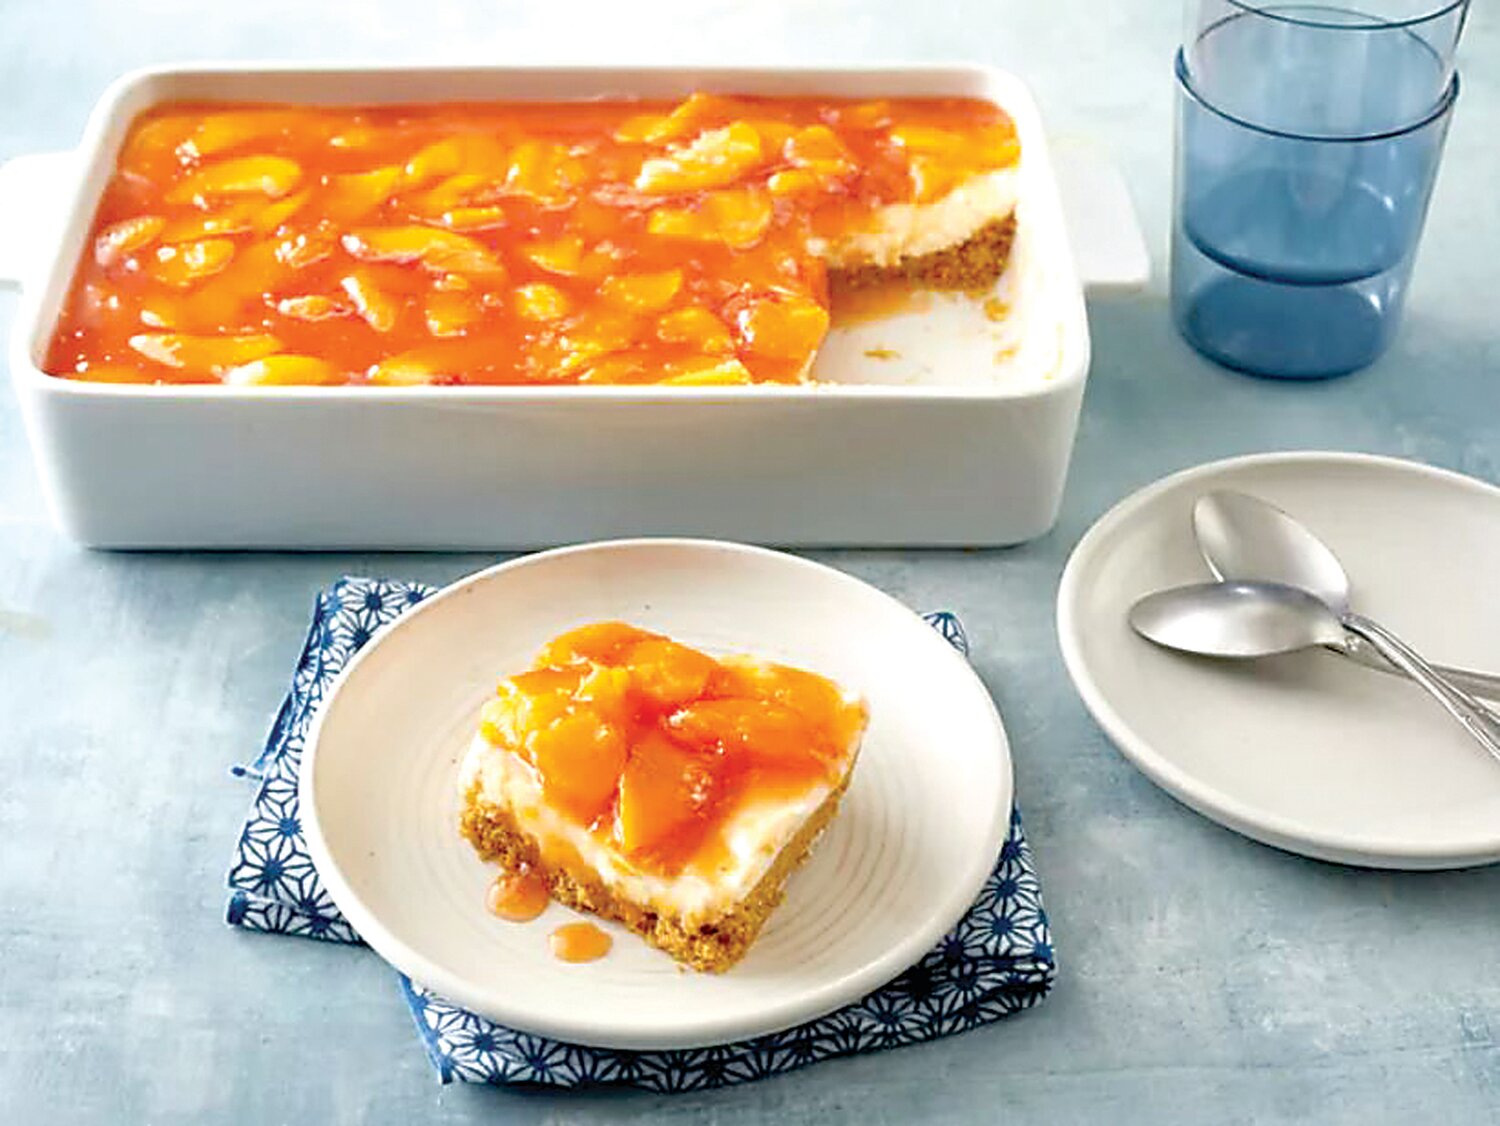 Peach Delight is a way to bake with peaches after you eat your fill during this outstanding local peach season.